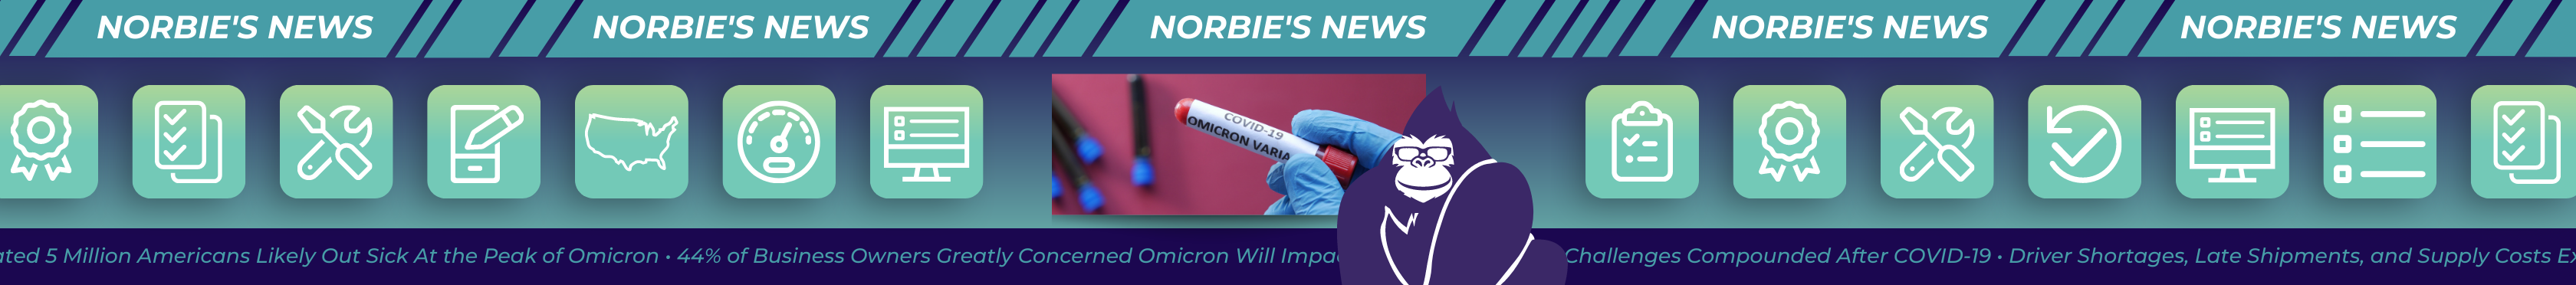 Header 2 - Omicron Variant Continues to Impact Small Business